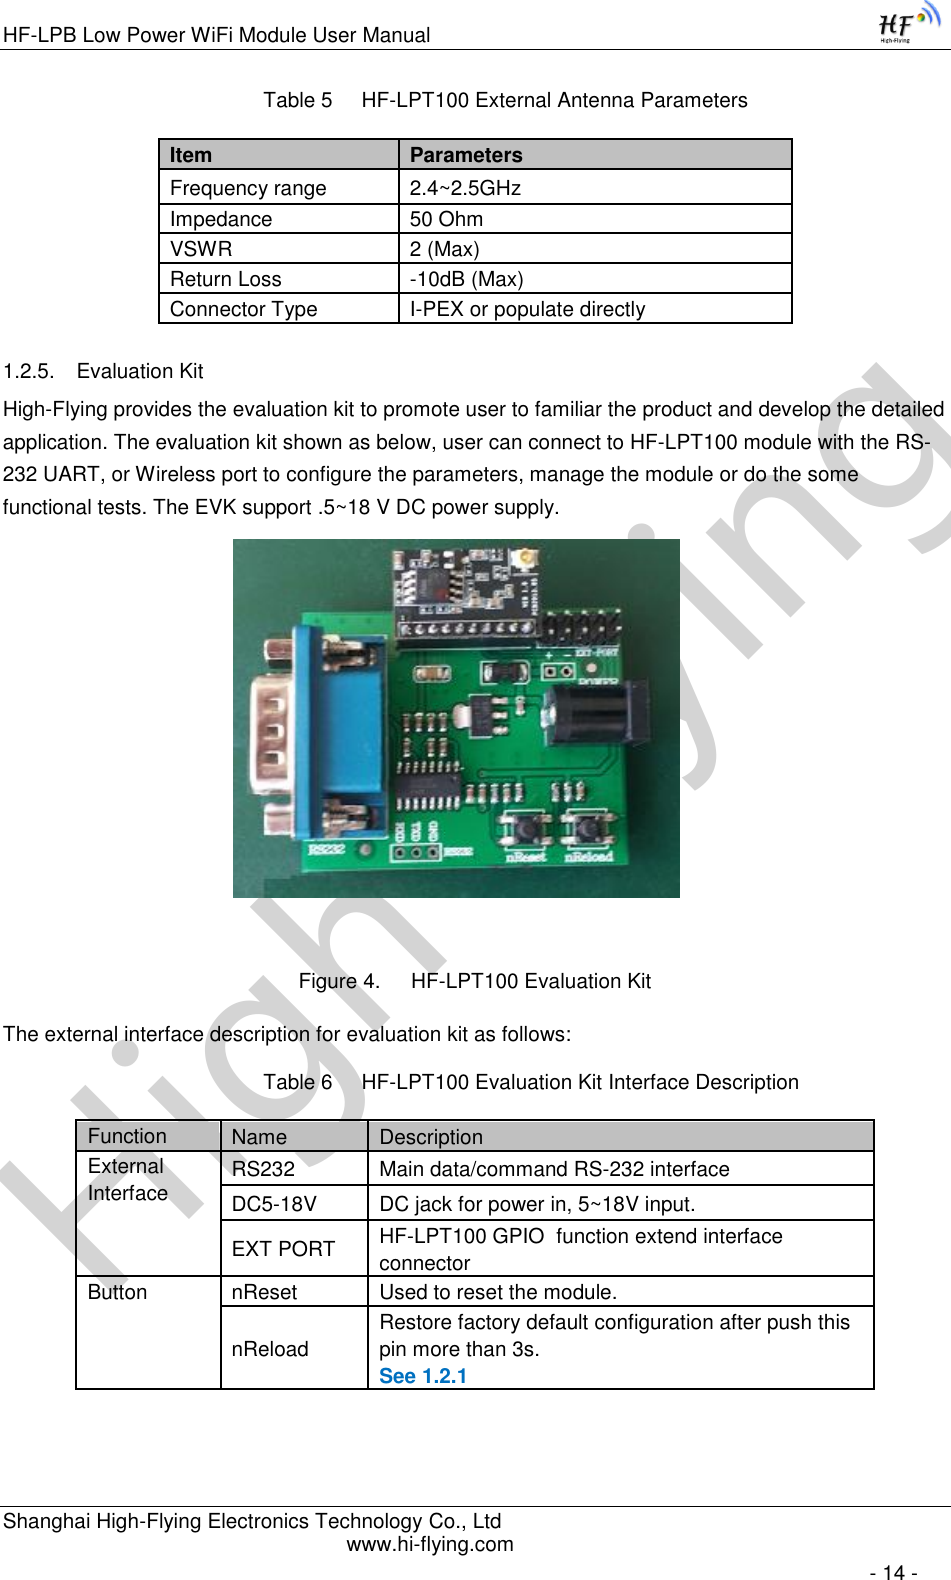 High-FlyingHF-LPB Low Power WiFi Module User Manual Shanghai High-Flying Electronics Technology Co., Ltd www.hi-flying.com   - 14 - Table 5     HF-LPT100 External Antenna Parameters  1.2.5. Evaluation Kit High-Flying provides the evaluation kit to promote user to familiar the product and develop the detailed application. The evaluation kit shown as below, user can connect to HF-LPT100 module with the RS-232 UART, or Wireless port to configure the parameters, manage the module or do the some functional tests. The EVK support .5~18 V DC power supply.                                       Figure 4. HF-LPT100 Evaluation Kit The external interface description for evaluation kit as follows: Table 6     HF-LPT100 Evaluation Kit Interface Description      Item Parameters Frequency range 2.4~2.5GHz Impedance 50 Ohm VSWR 2 (Max) Return Loss -10dB (Max) Connector Type I-PEX or populate directly Function Name Description External Interface RS232 Main data/command RS-232 interface DC5-18V DC jack for power in, 5~18V input. EXT PORT HF-LPT100 GPIO  function extend interface connector Button nReset Used to reset the module. nReload Restore factory default configuration after push this pin more than 3s. See 1.2.1 